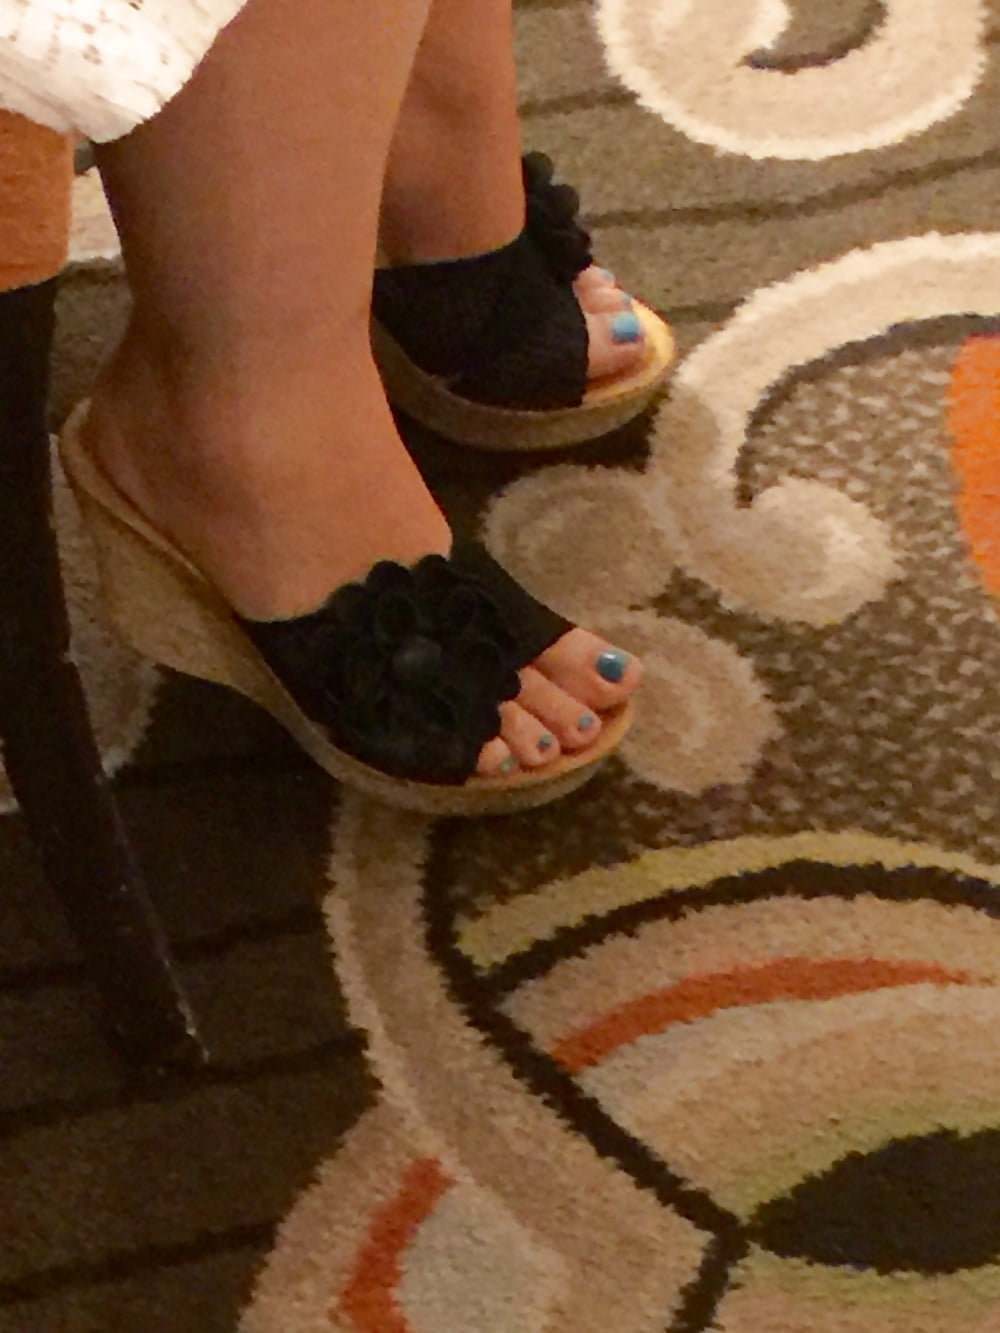 Porn image Wife's sexy feet in wedges playing in Vegas